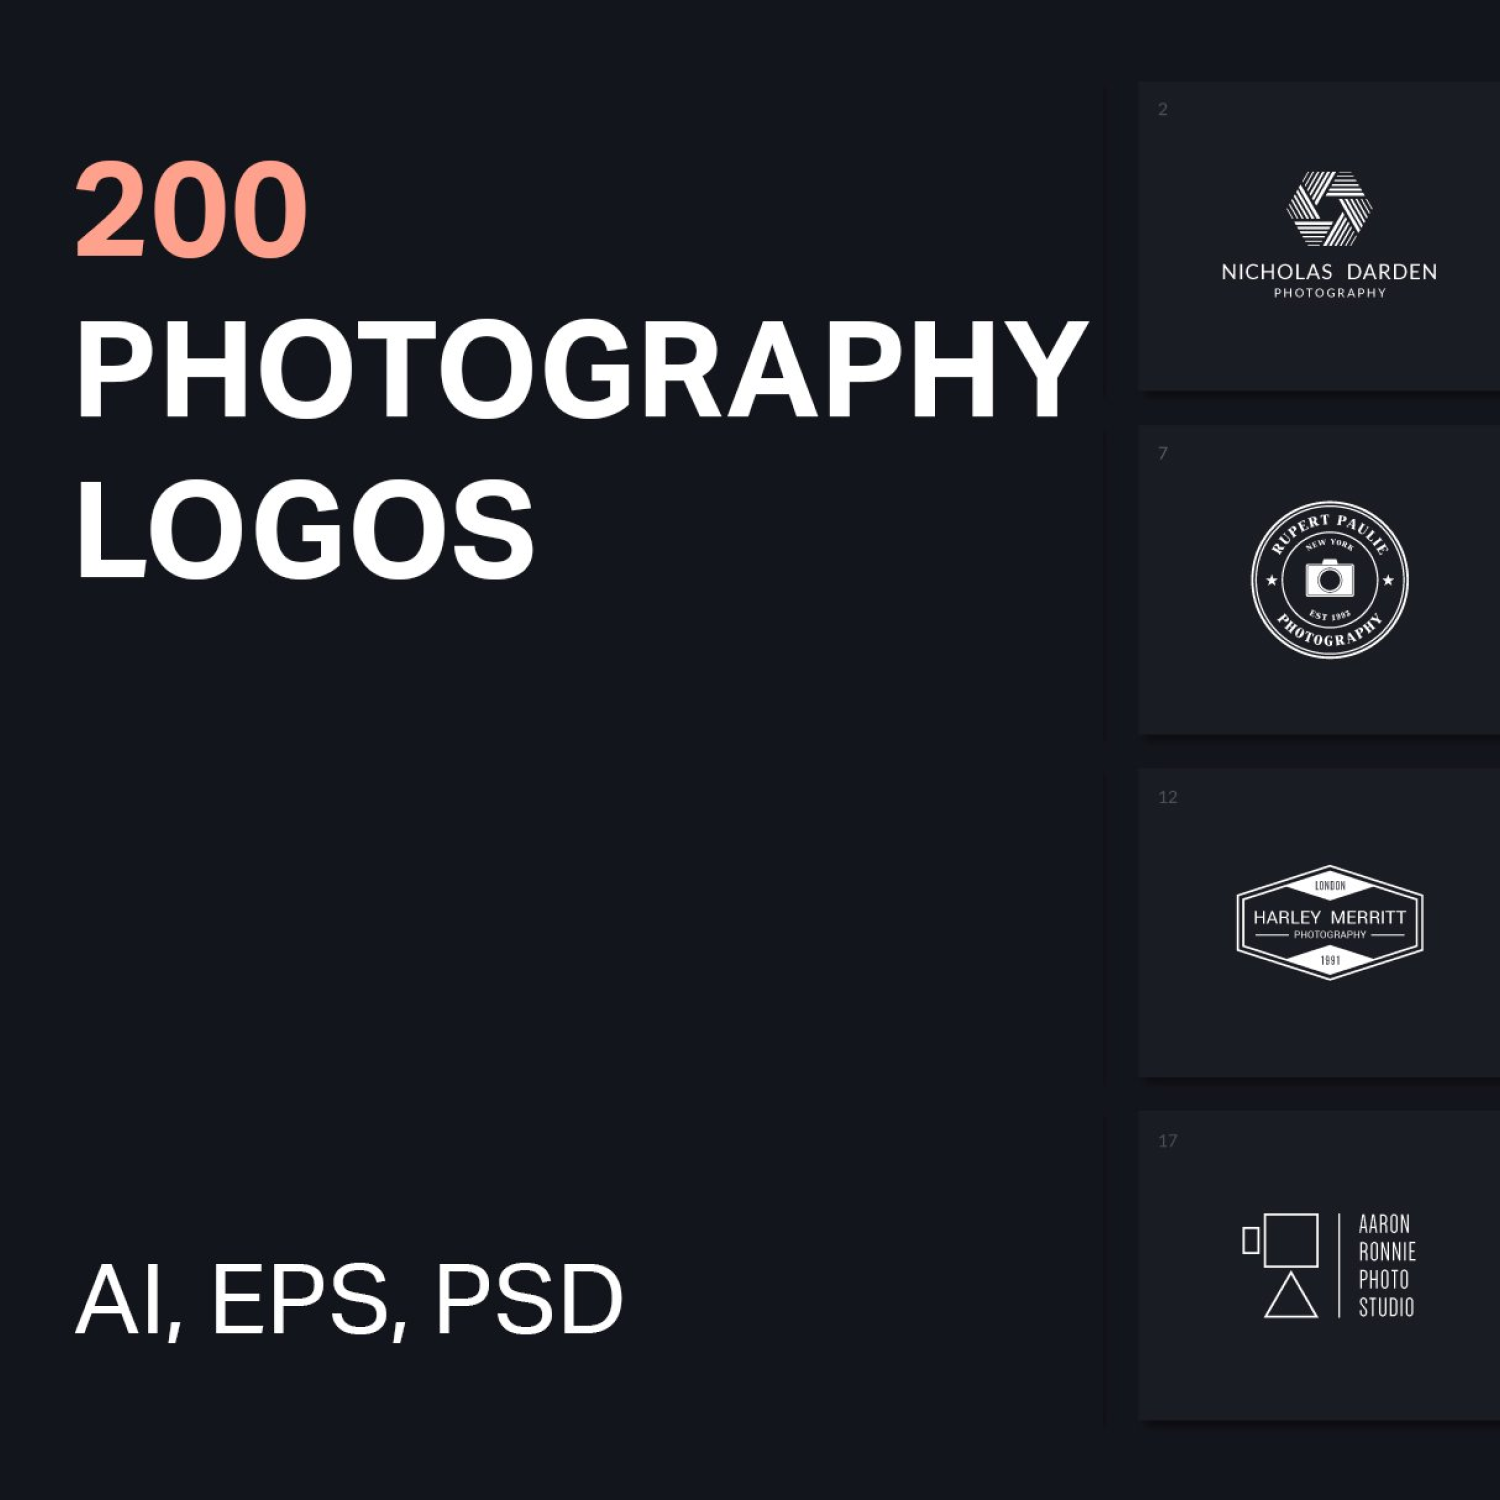 Image photography logos preview.